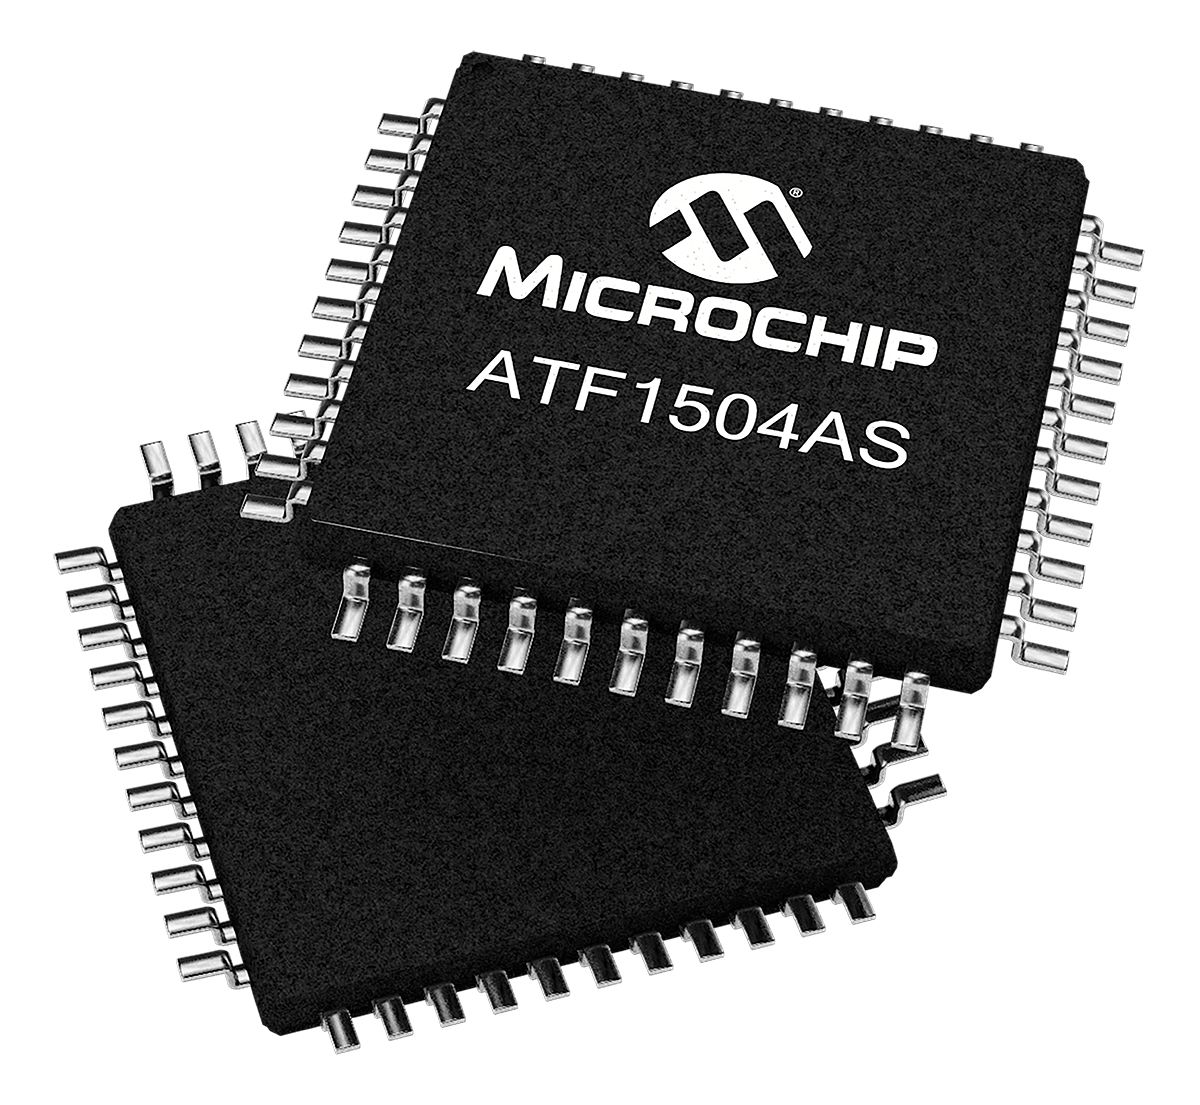 Microchip ATF1504AS-10AU44, CPLD ATF1504AS 64 Cells, 68 I/O, 3 Labs, 10ns, ISP, 44-Pin TQFP